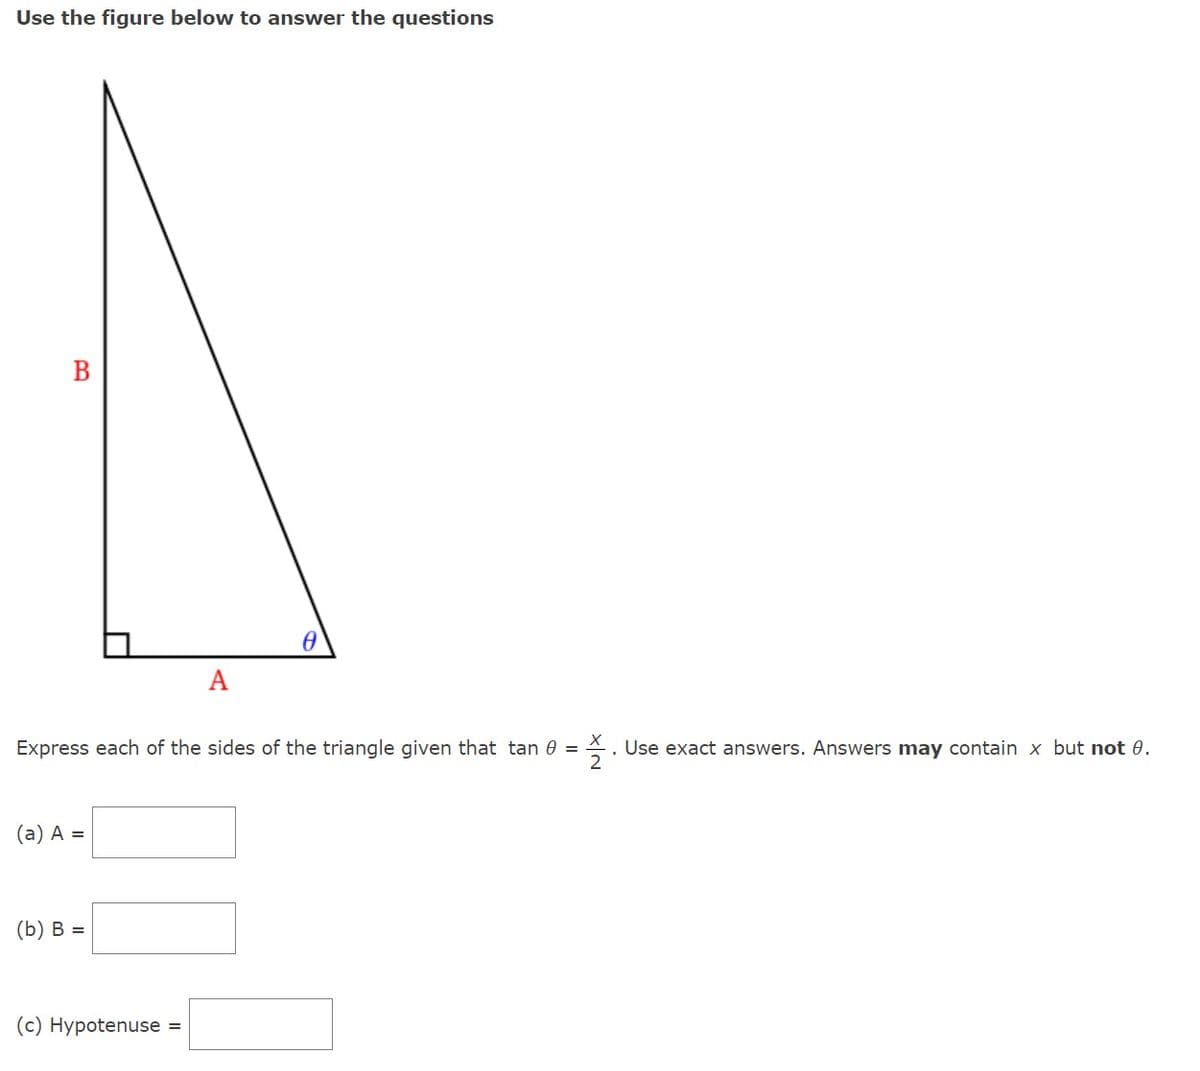 Use the figure below to answer the questions
B
(a) A =
Express each of the sides of the triangle given that tan 0 = Use exact answers. Answers may contain x but not 0.
2
(b) B =
A
(c) Hypotenuse =
0
I